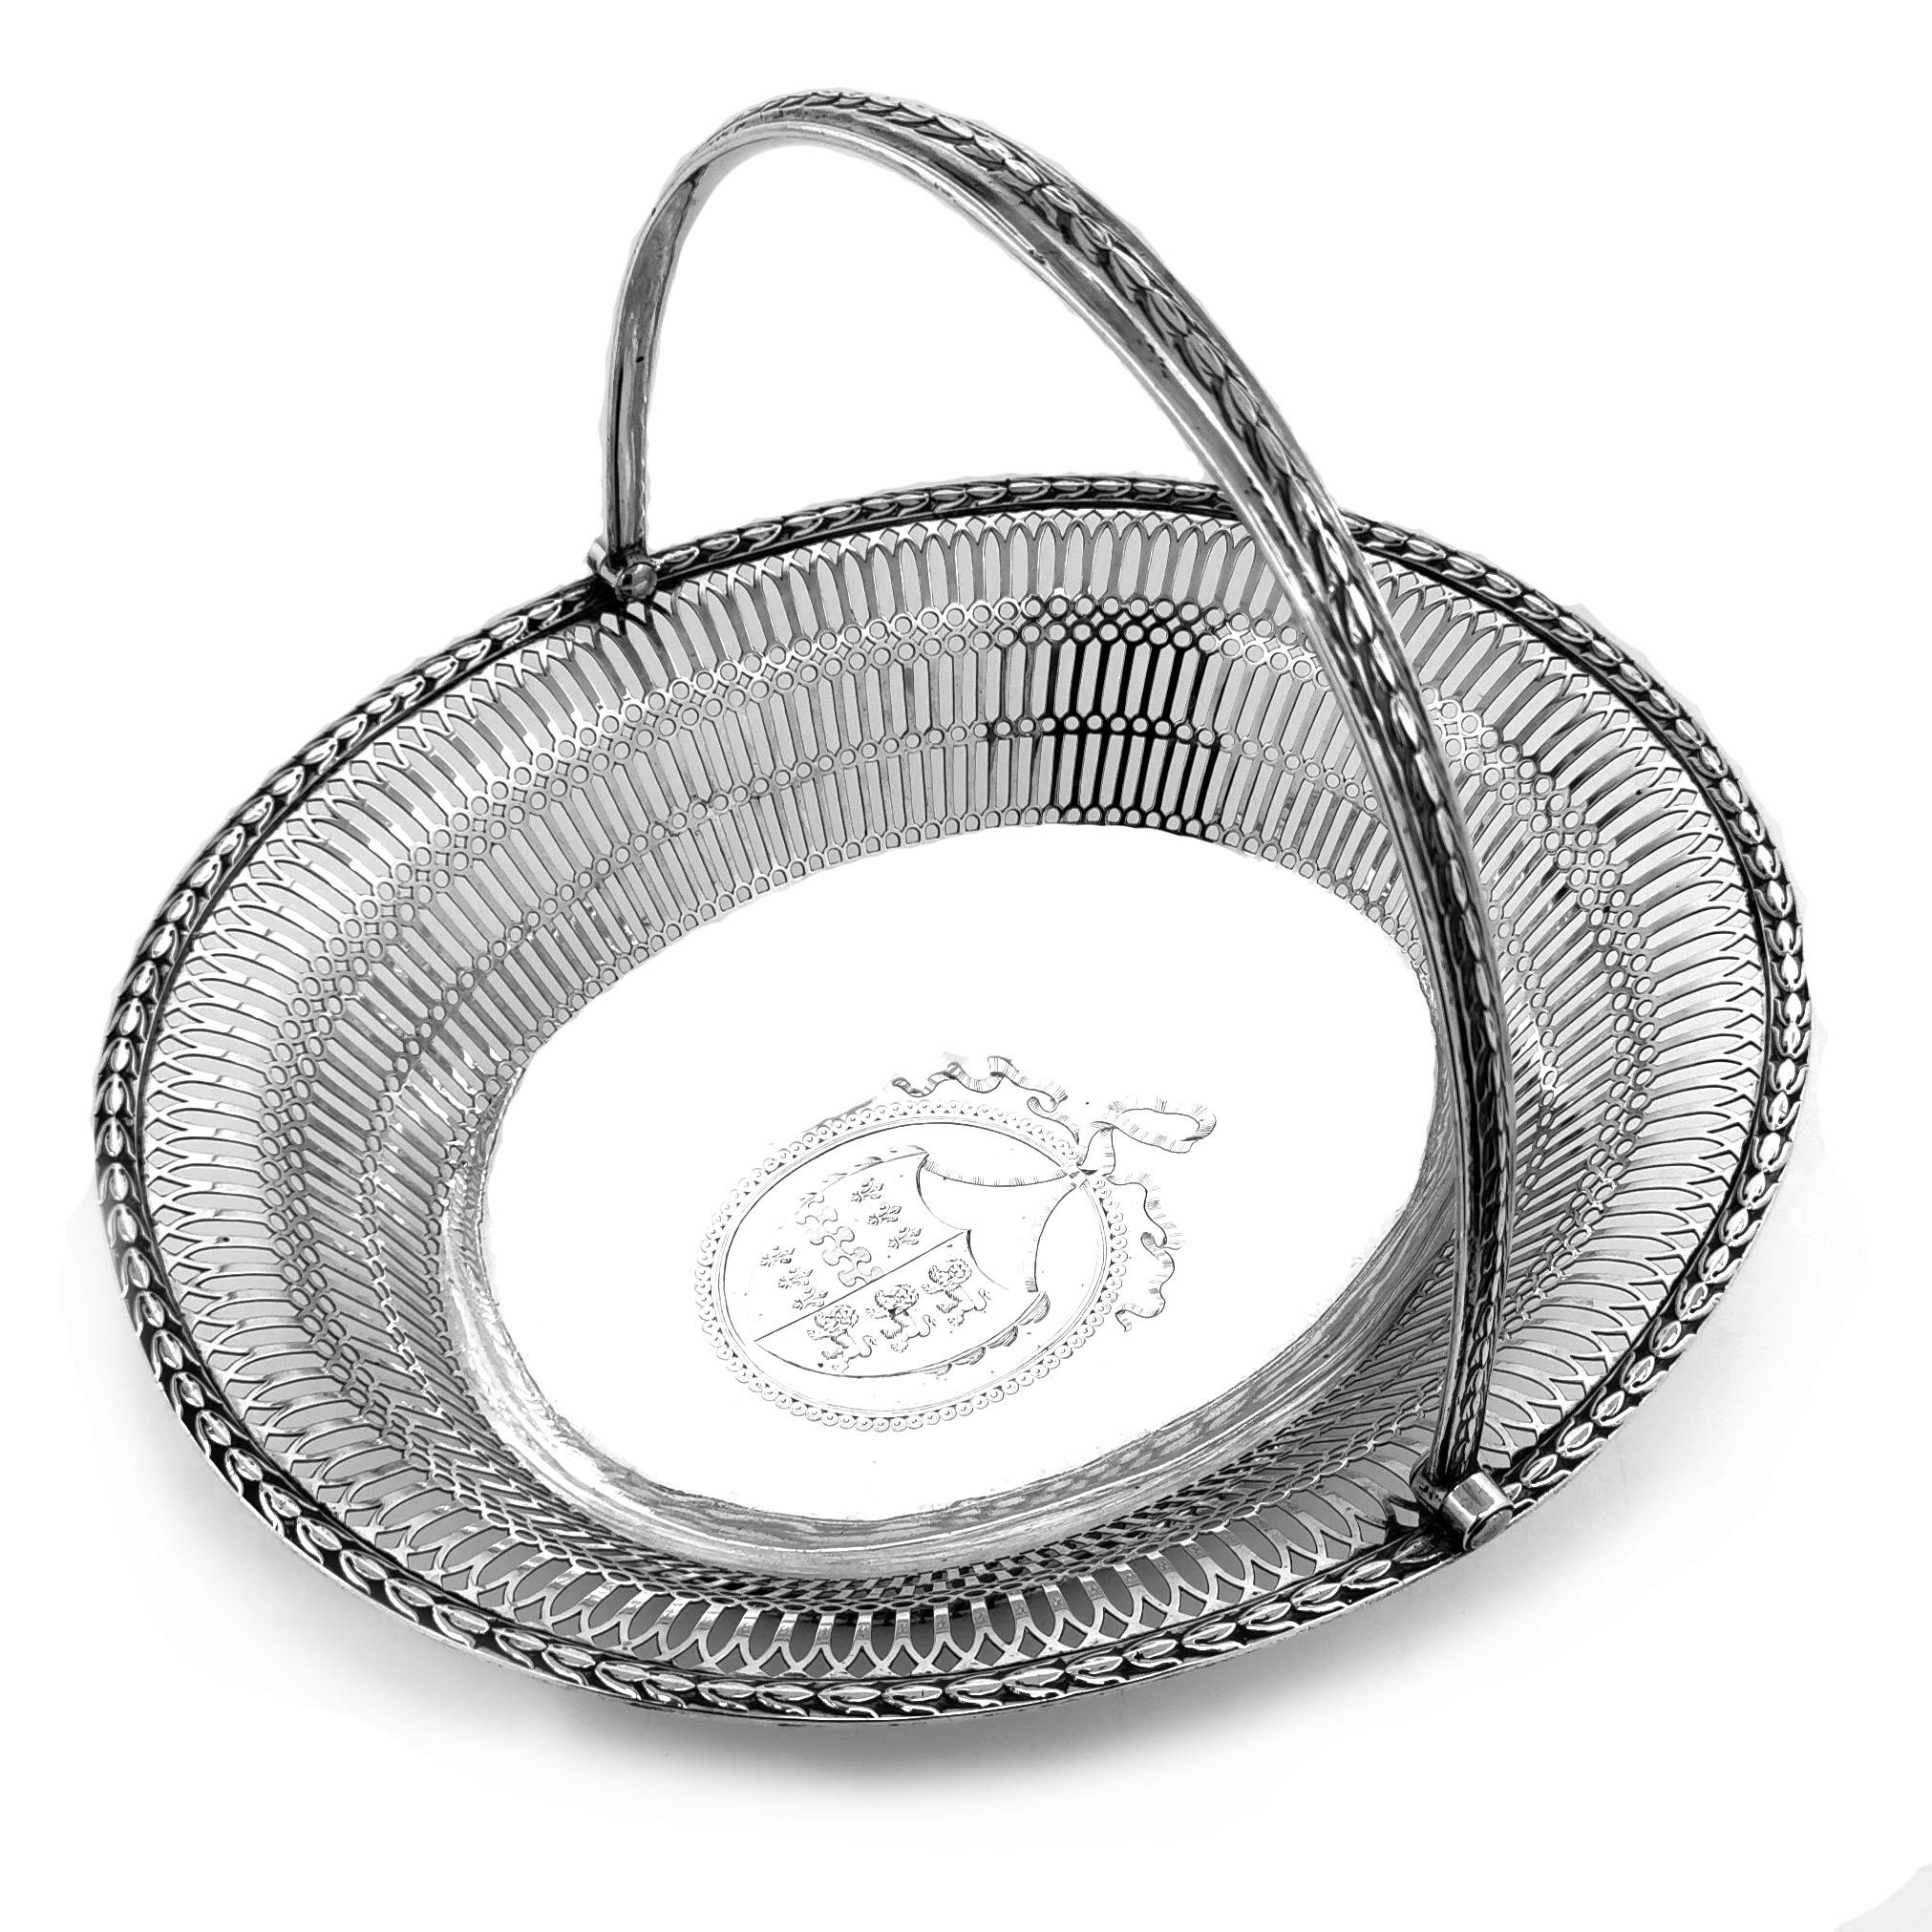 18th Century and Earlier Antique Georgian Sterling Silver Basket 1774 Cake Bread Serving Swing Handle For Sale